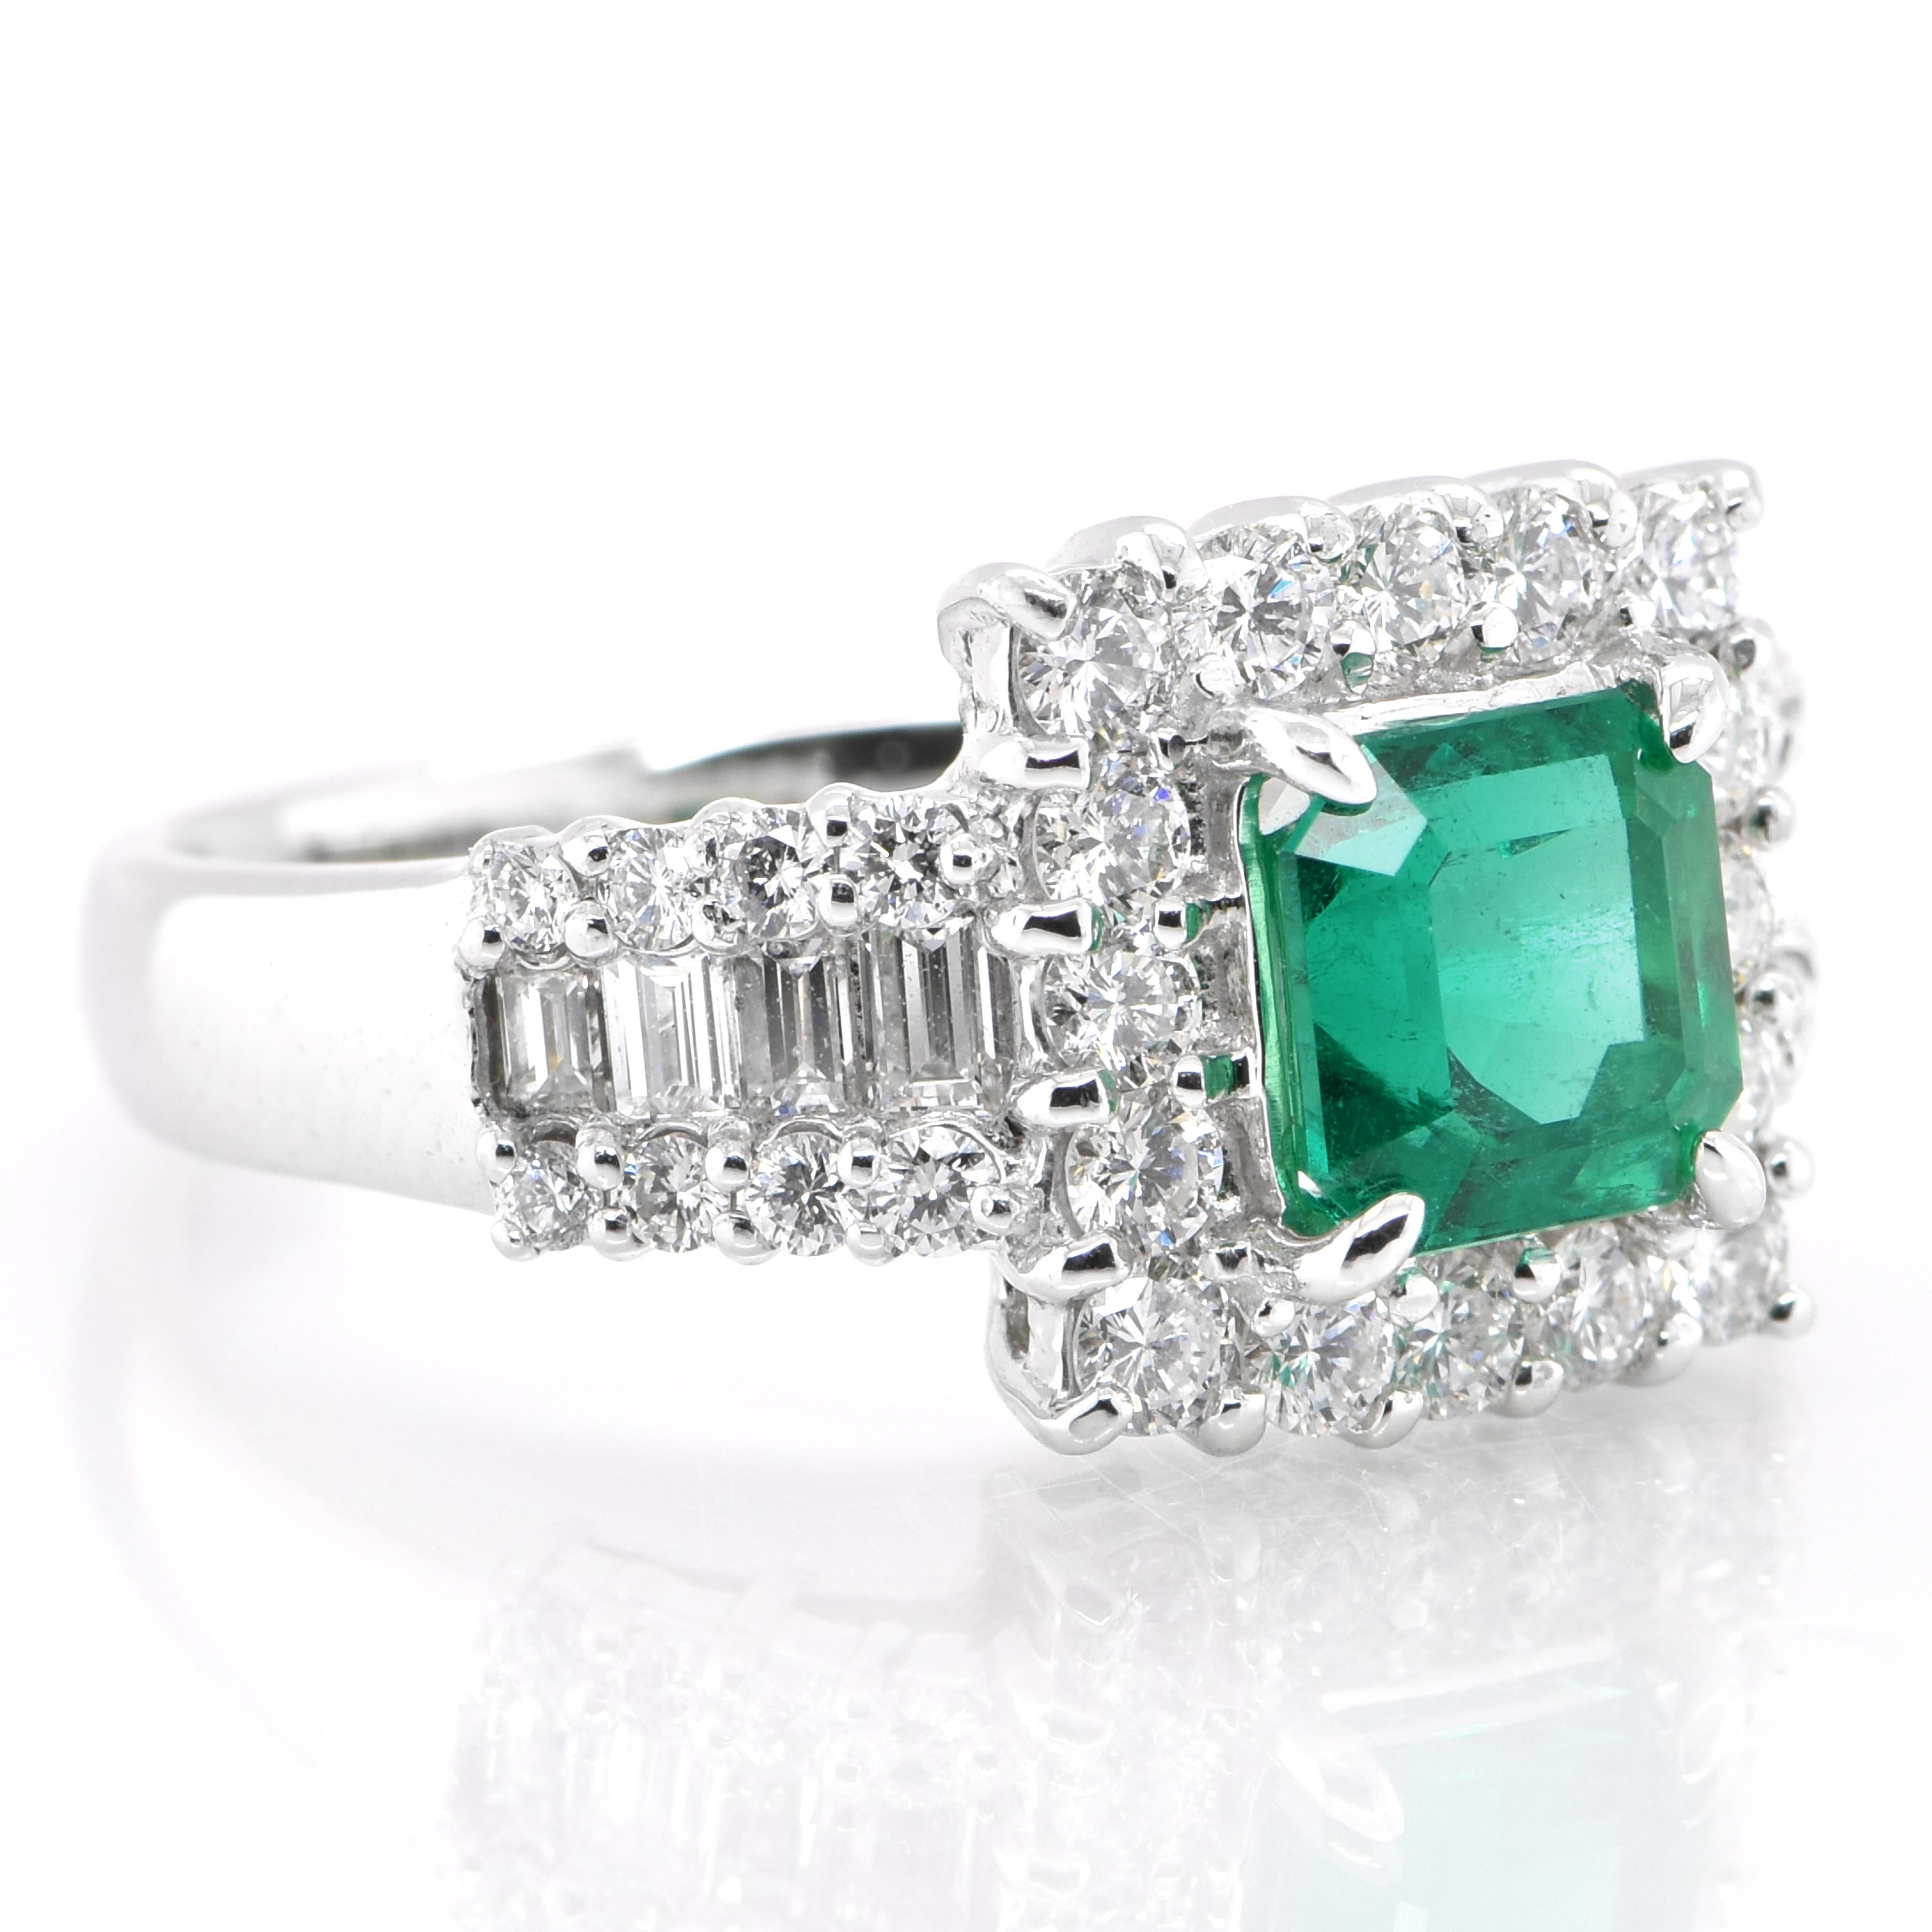 A stunning ring featuring a GRS Certified 1.39 Carat Natural Vivid Green Colombian Emerald and 1.14 Carats of Diamond Accents set in Platinum. People have admired emerald’s green for thousands of years. Emeralds have always been associated with the